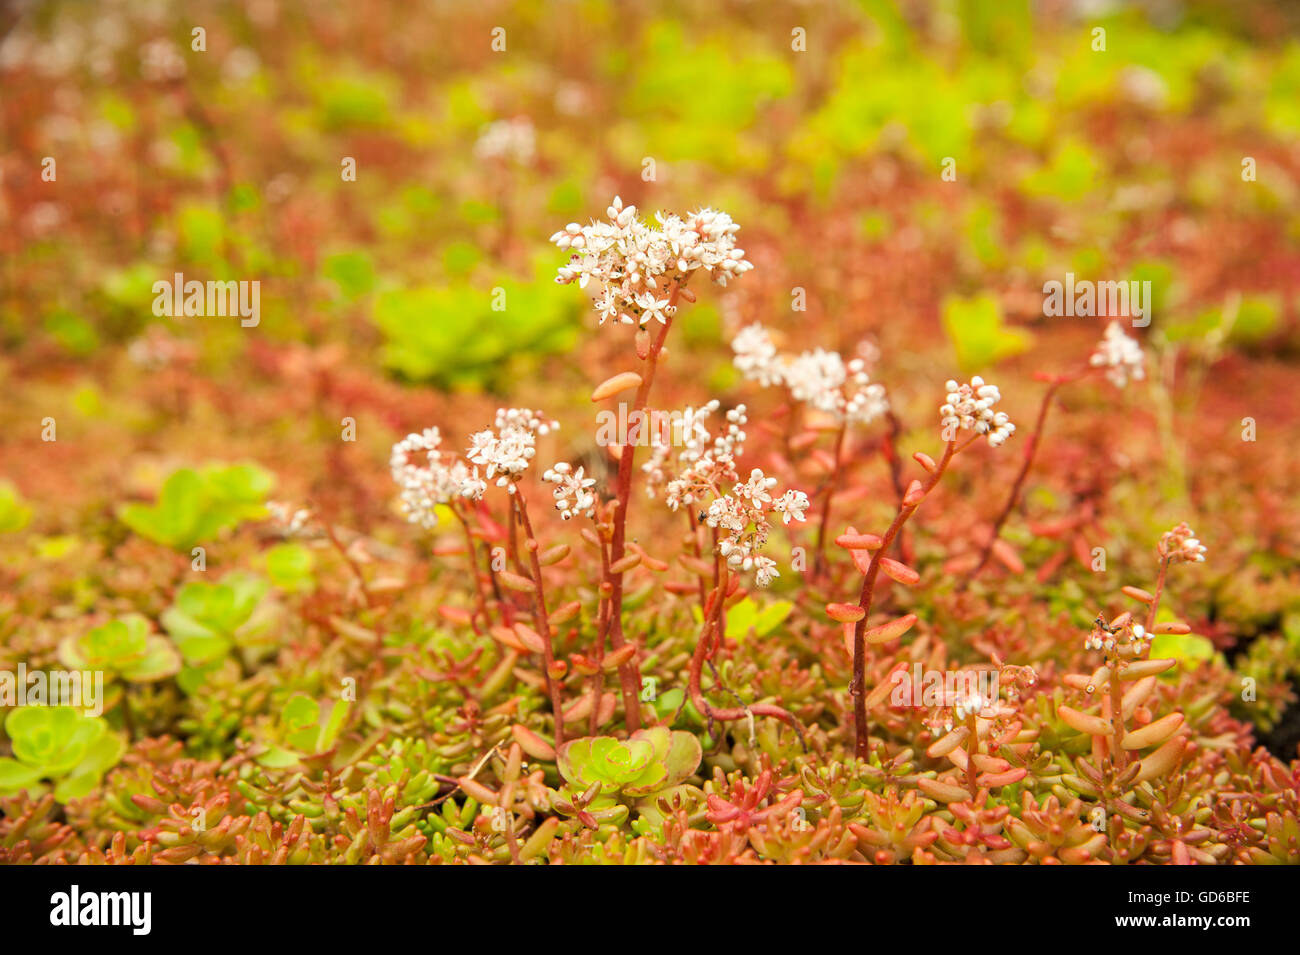 Close up detail of a bicycle shed roof Sedum with white flowers with red and green leaves found within a garden Kent Stock Photo